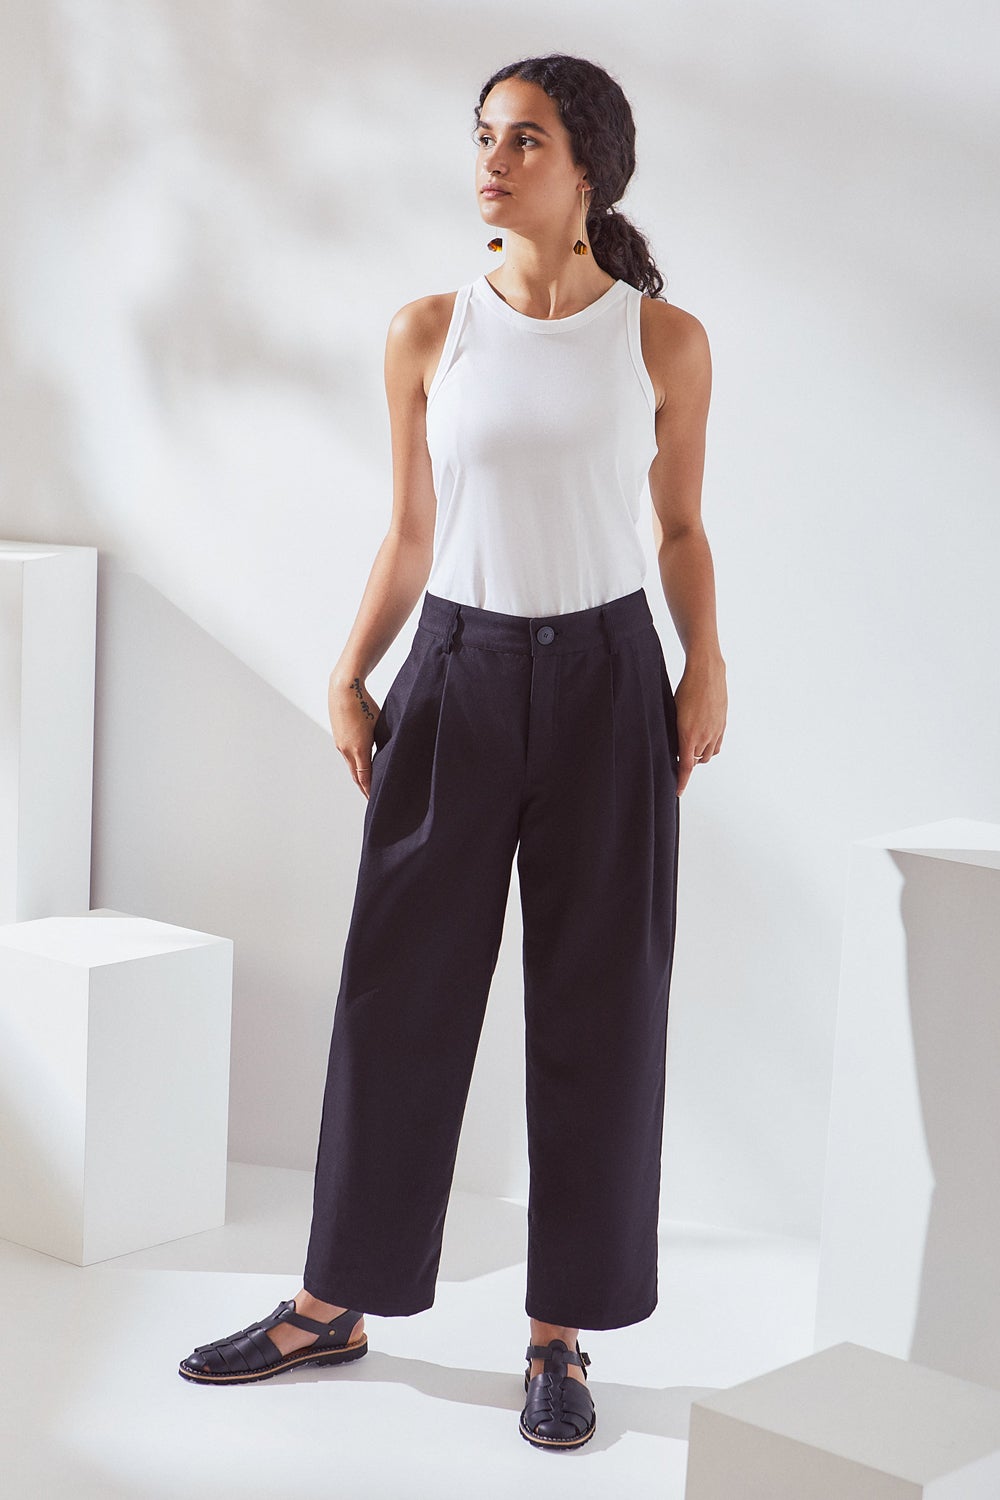 Kowtow Faculty Pant